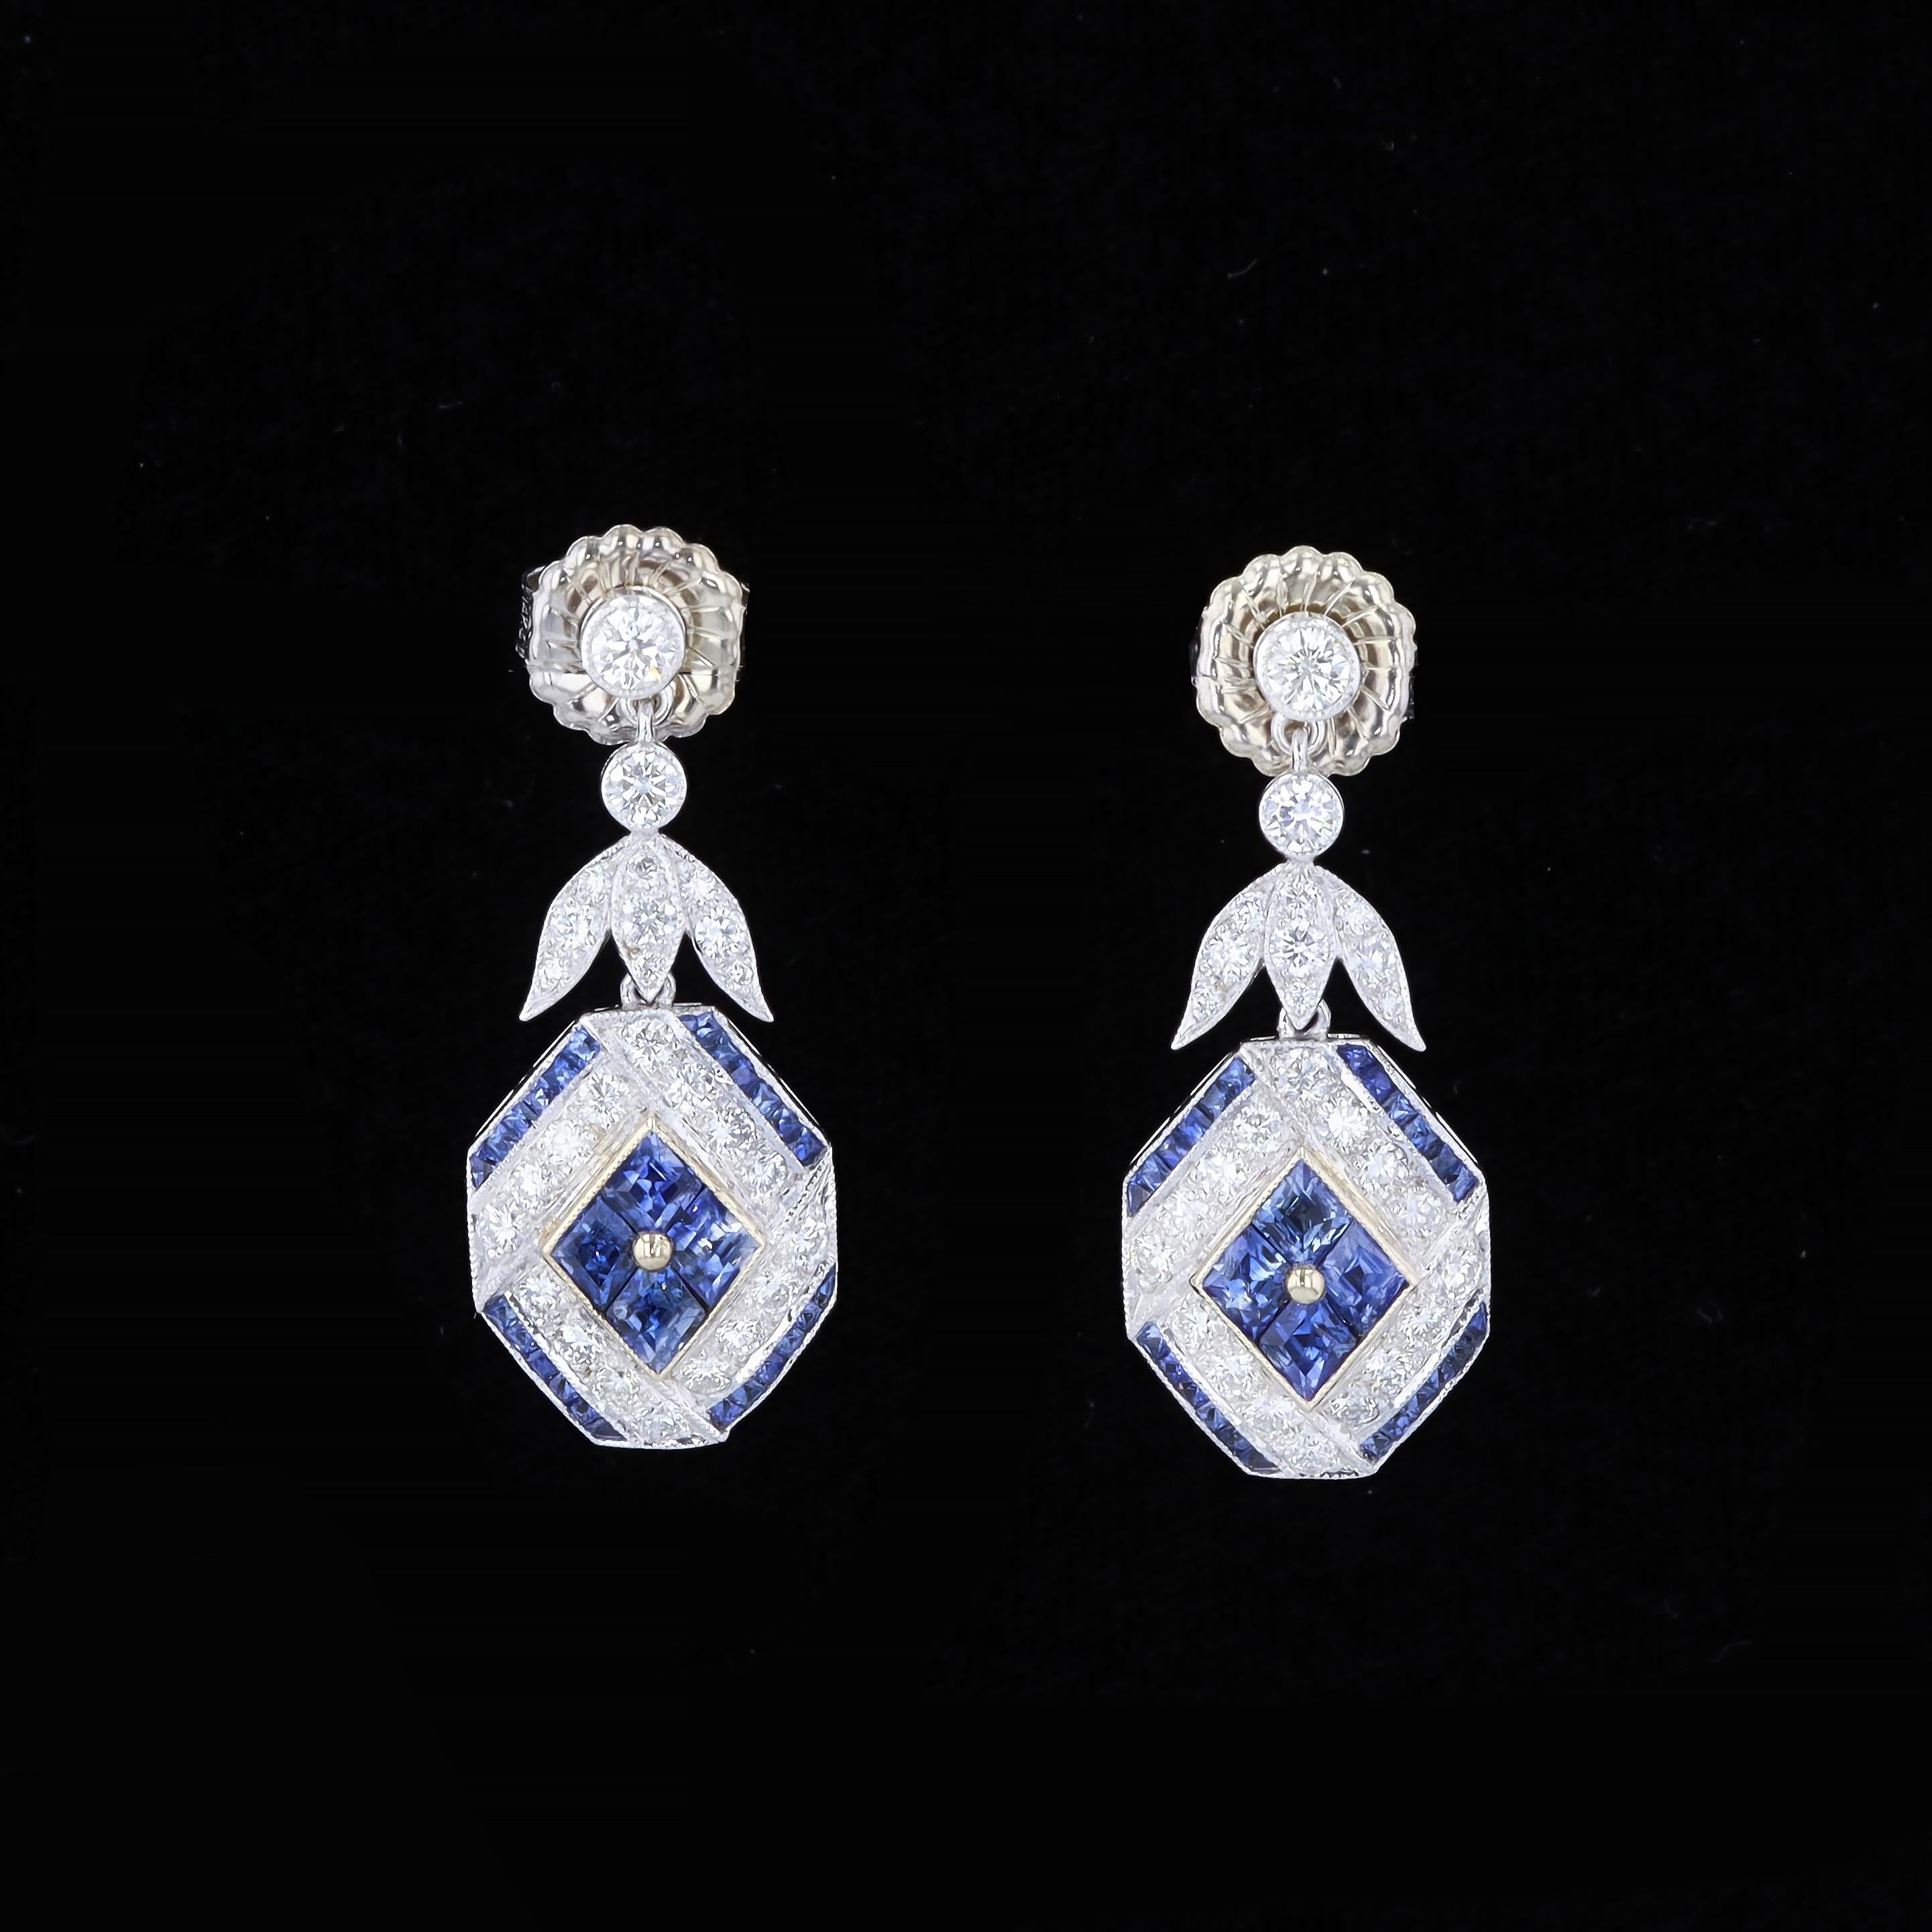 Art Deco 18K White and Yellow Gold Diamond Earrings with French Cut Sapphires For Sale